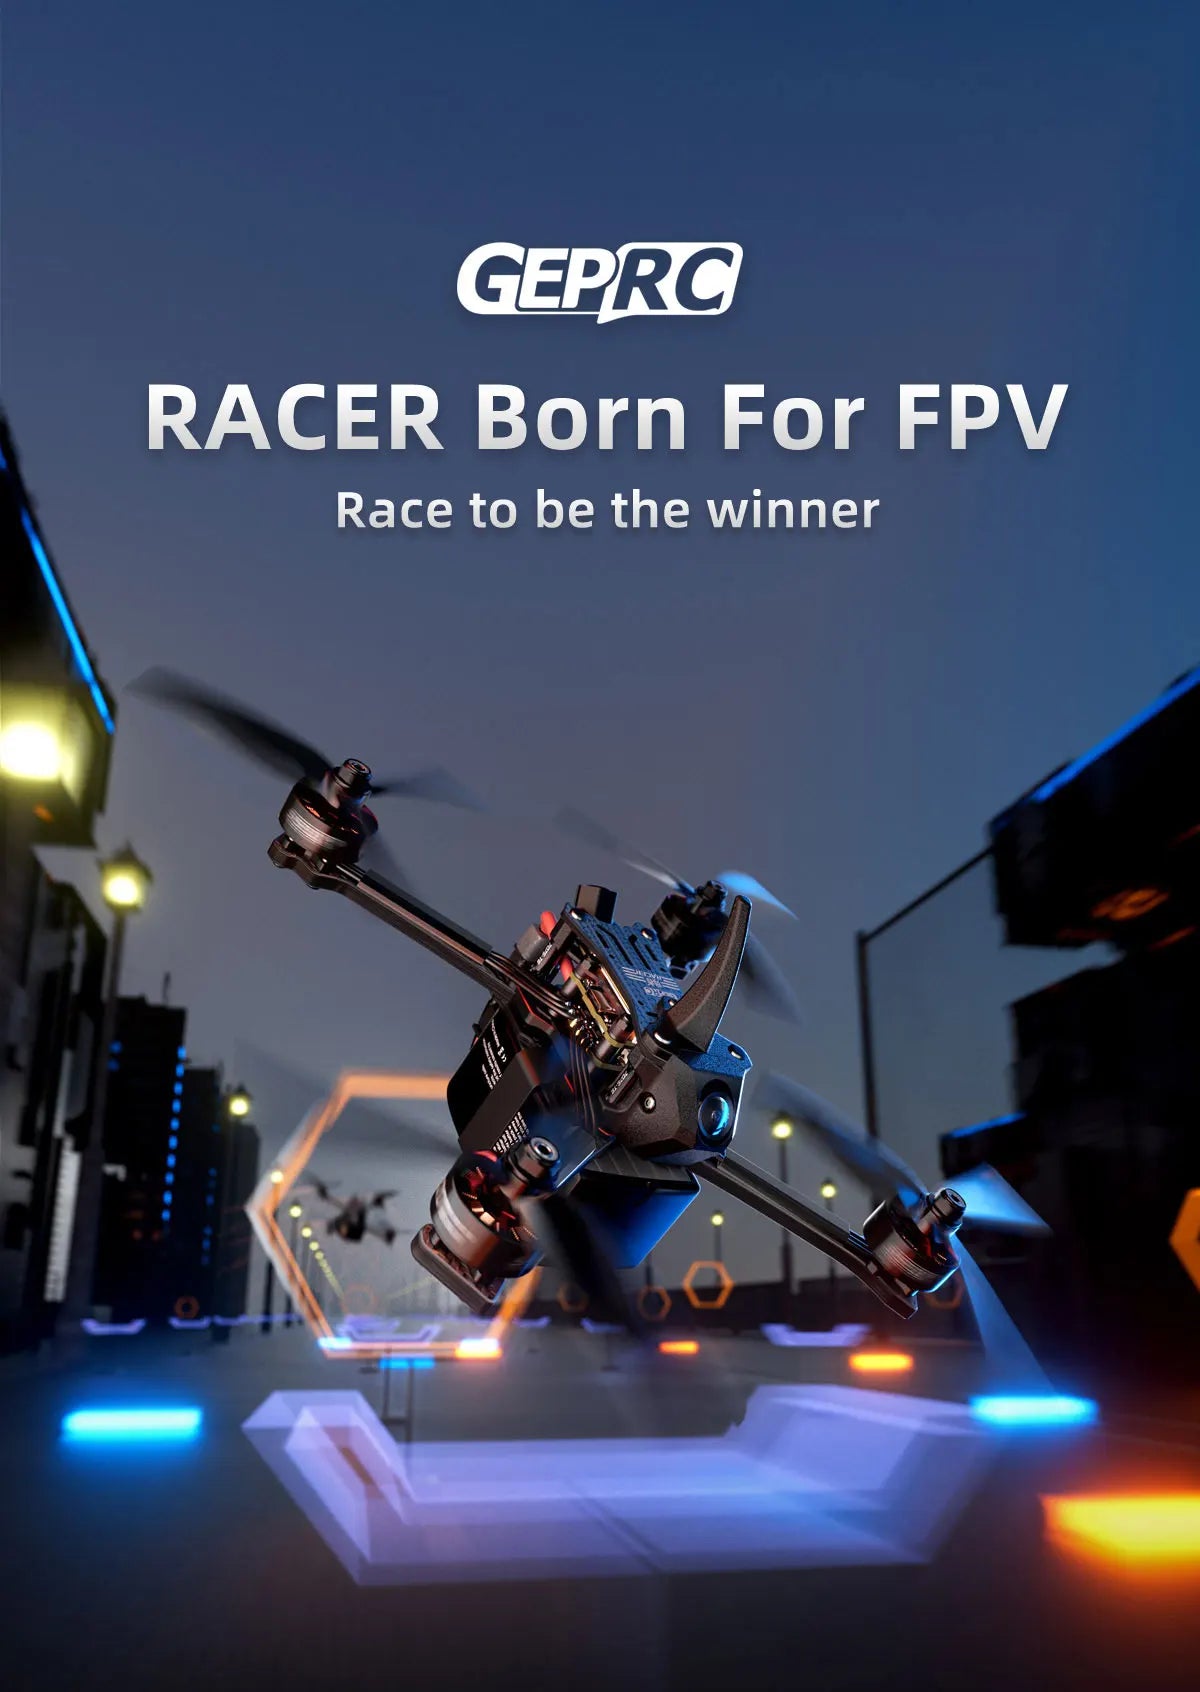 GEPRC Racer FPV, overall performance has strong explosive power.